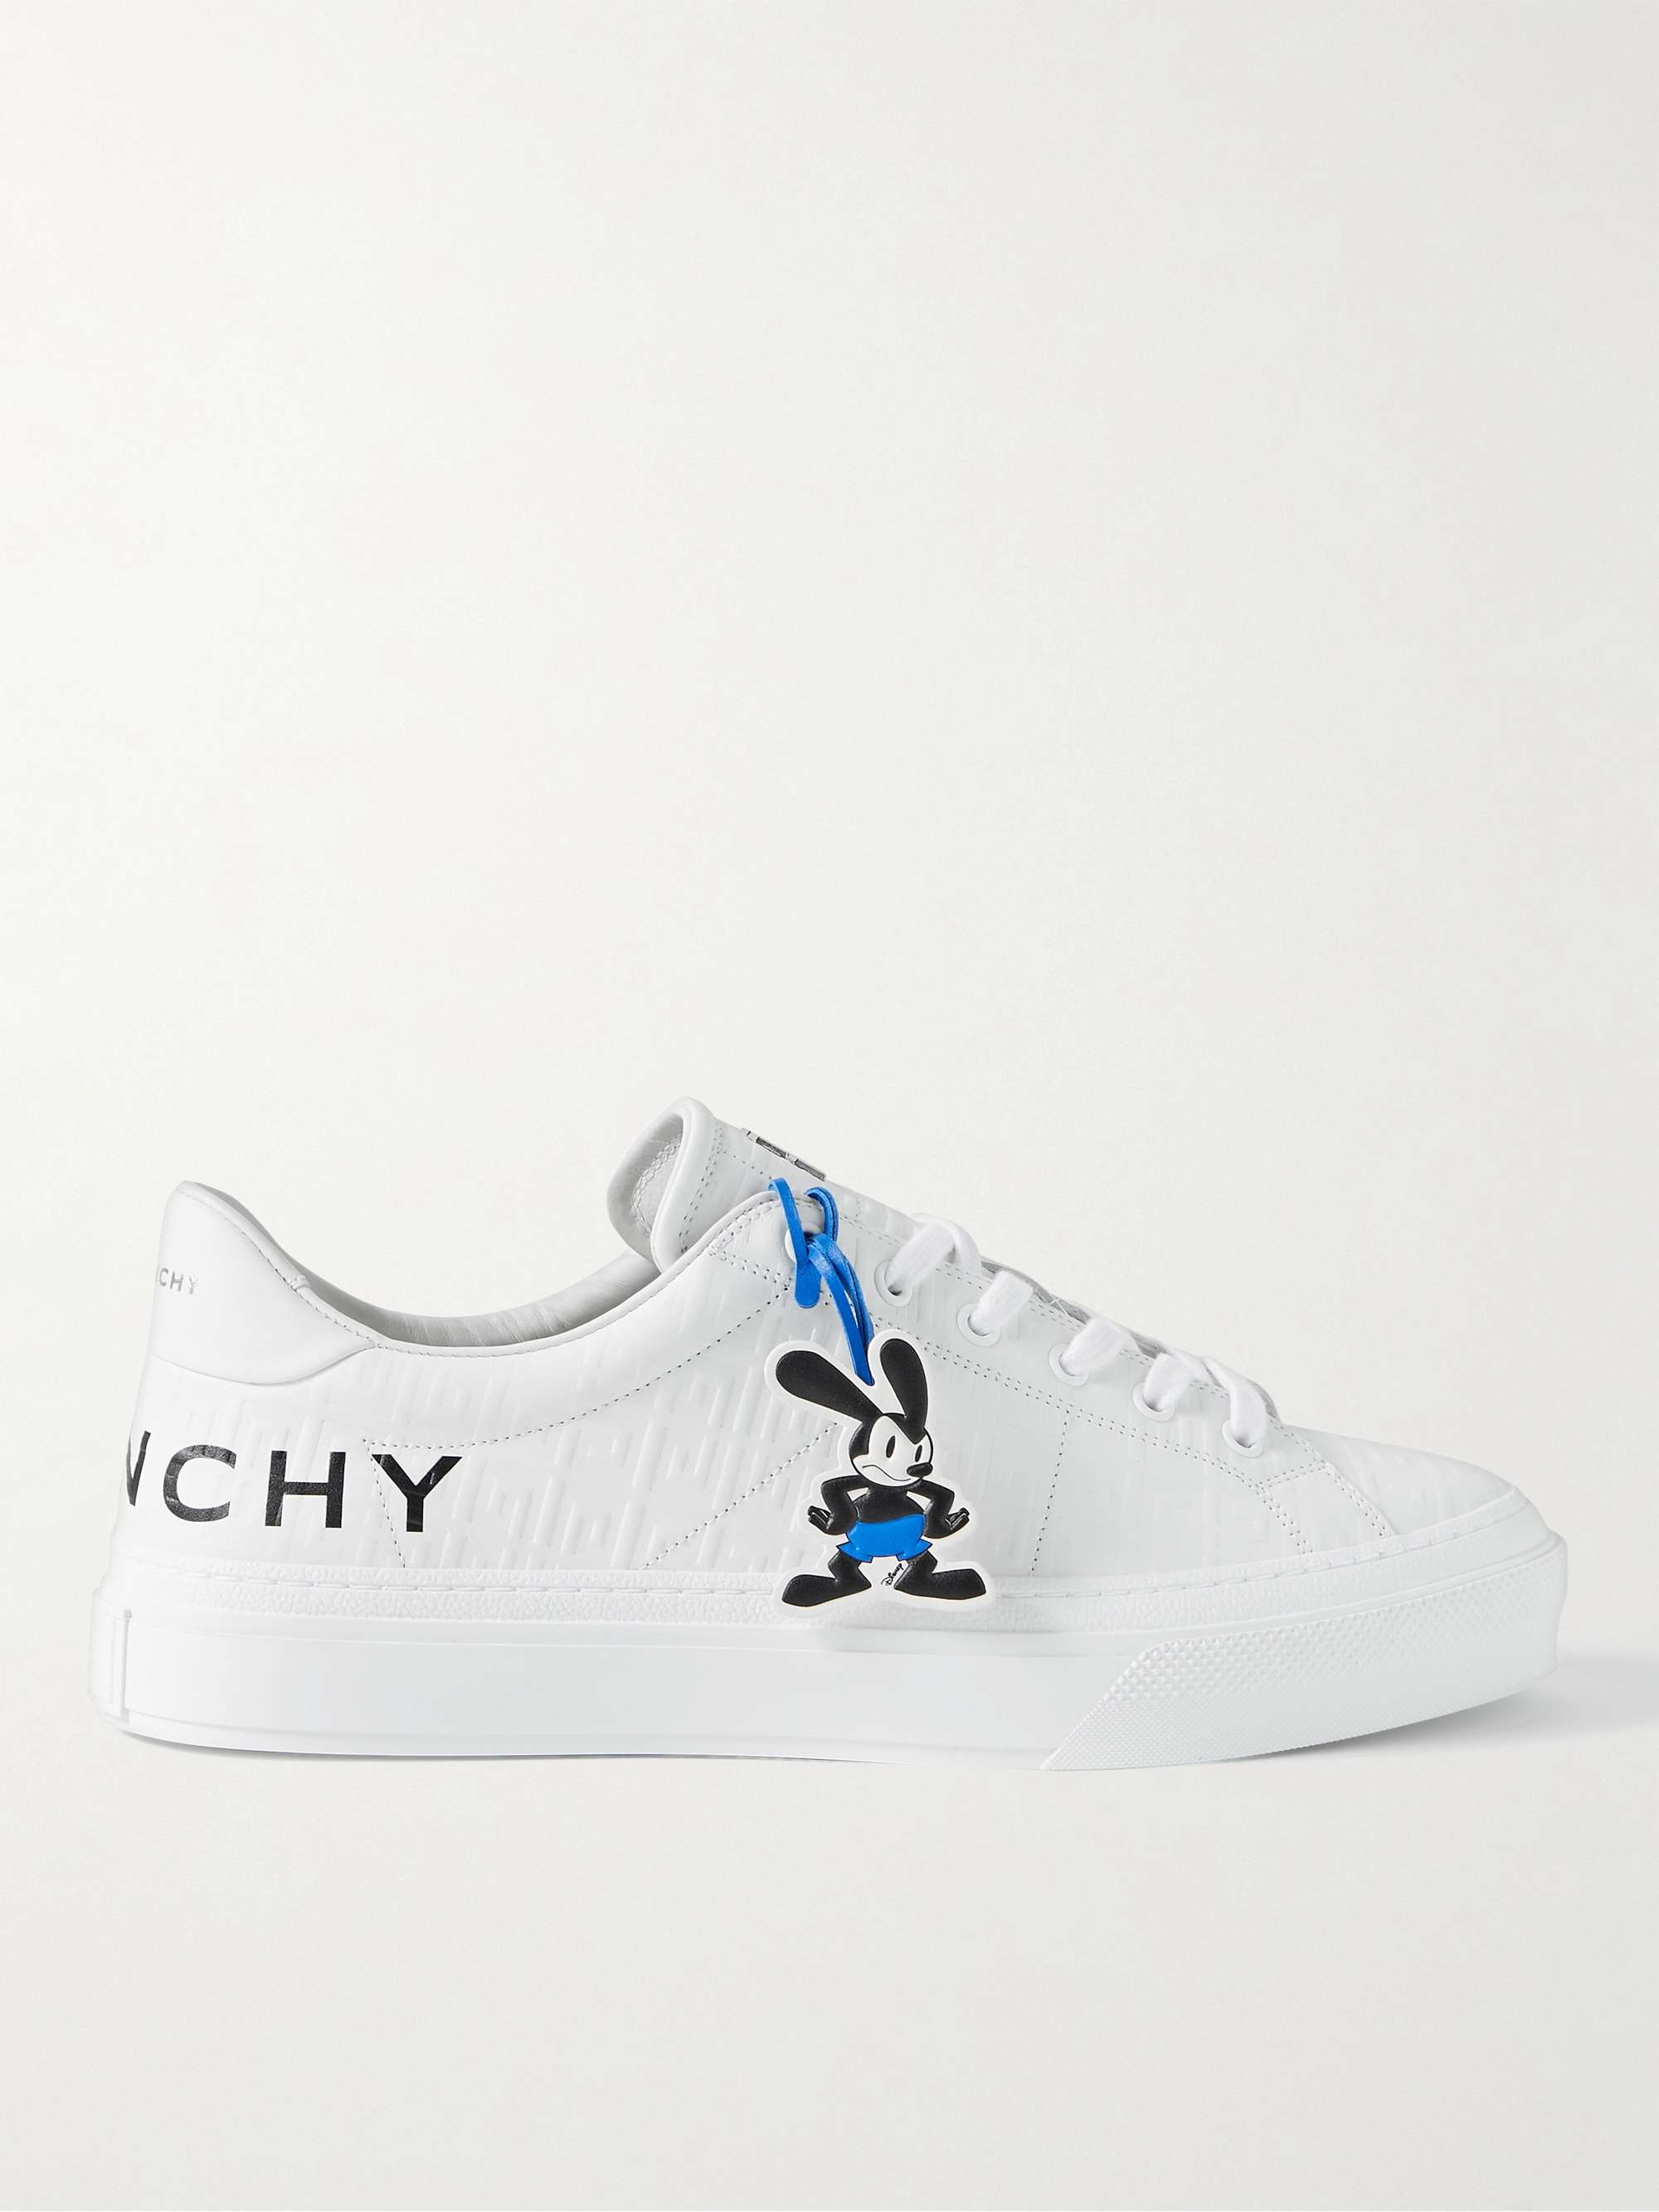 GIVENCHY + Disney Oswald City Sport Debossed Leather Sneakers | MR PORTER